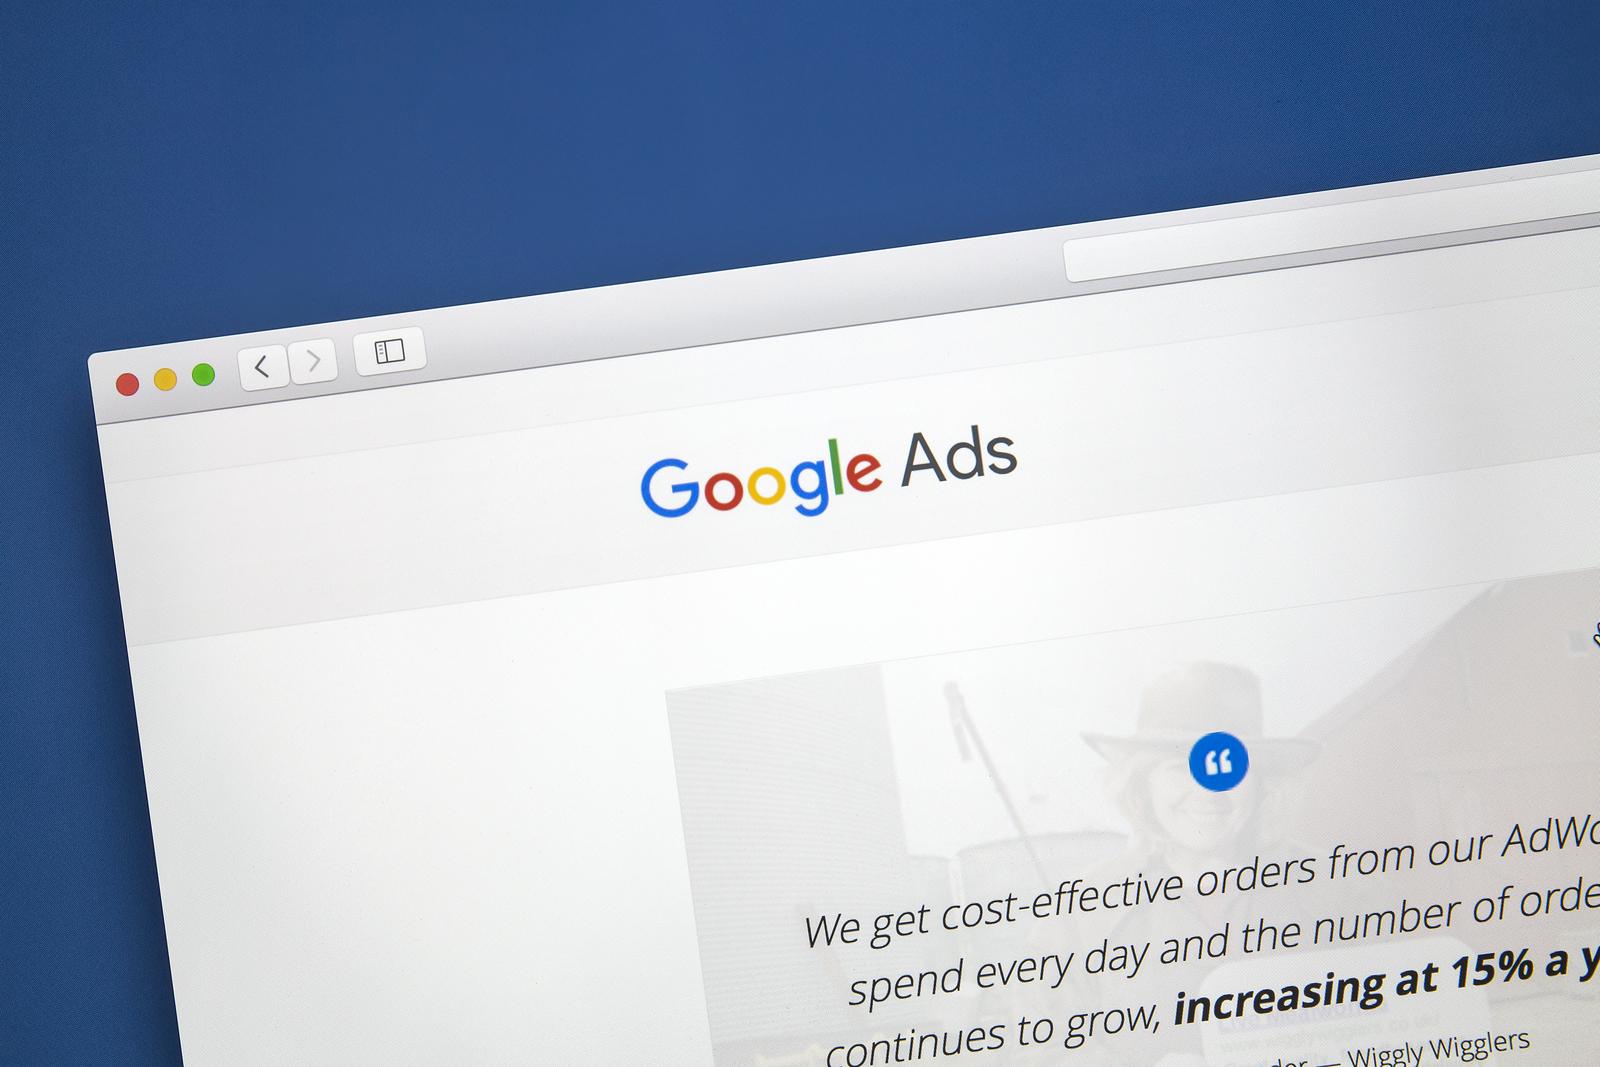 Google Ads is an online advertising service developed by Google.